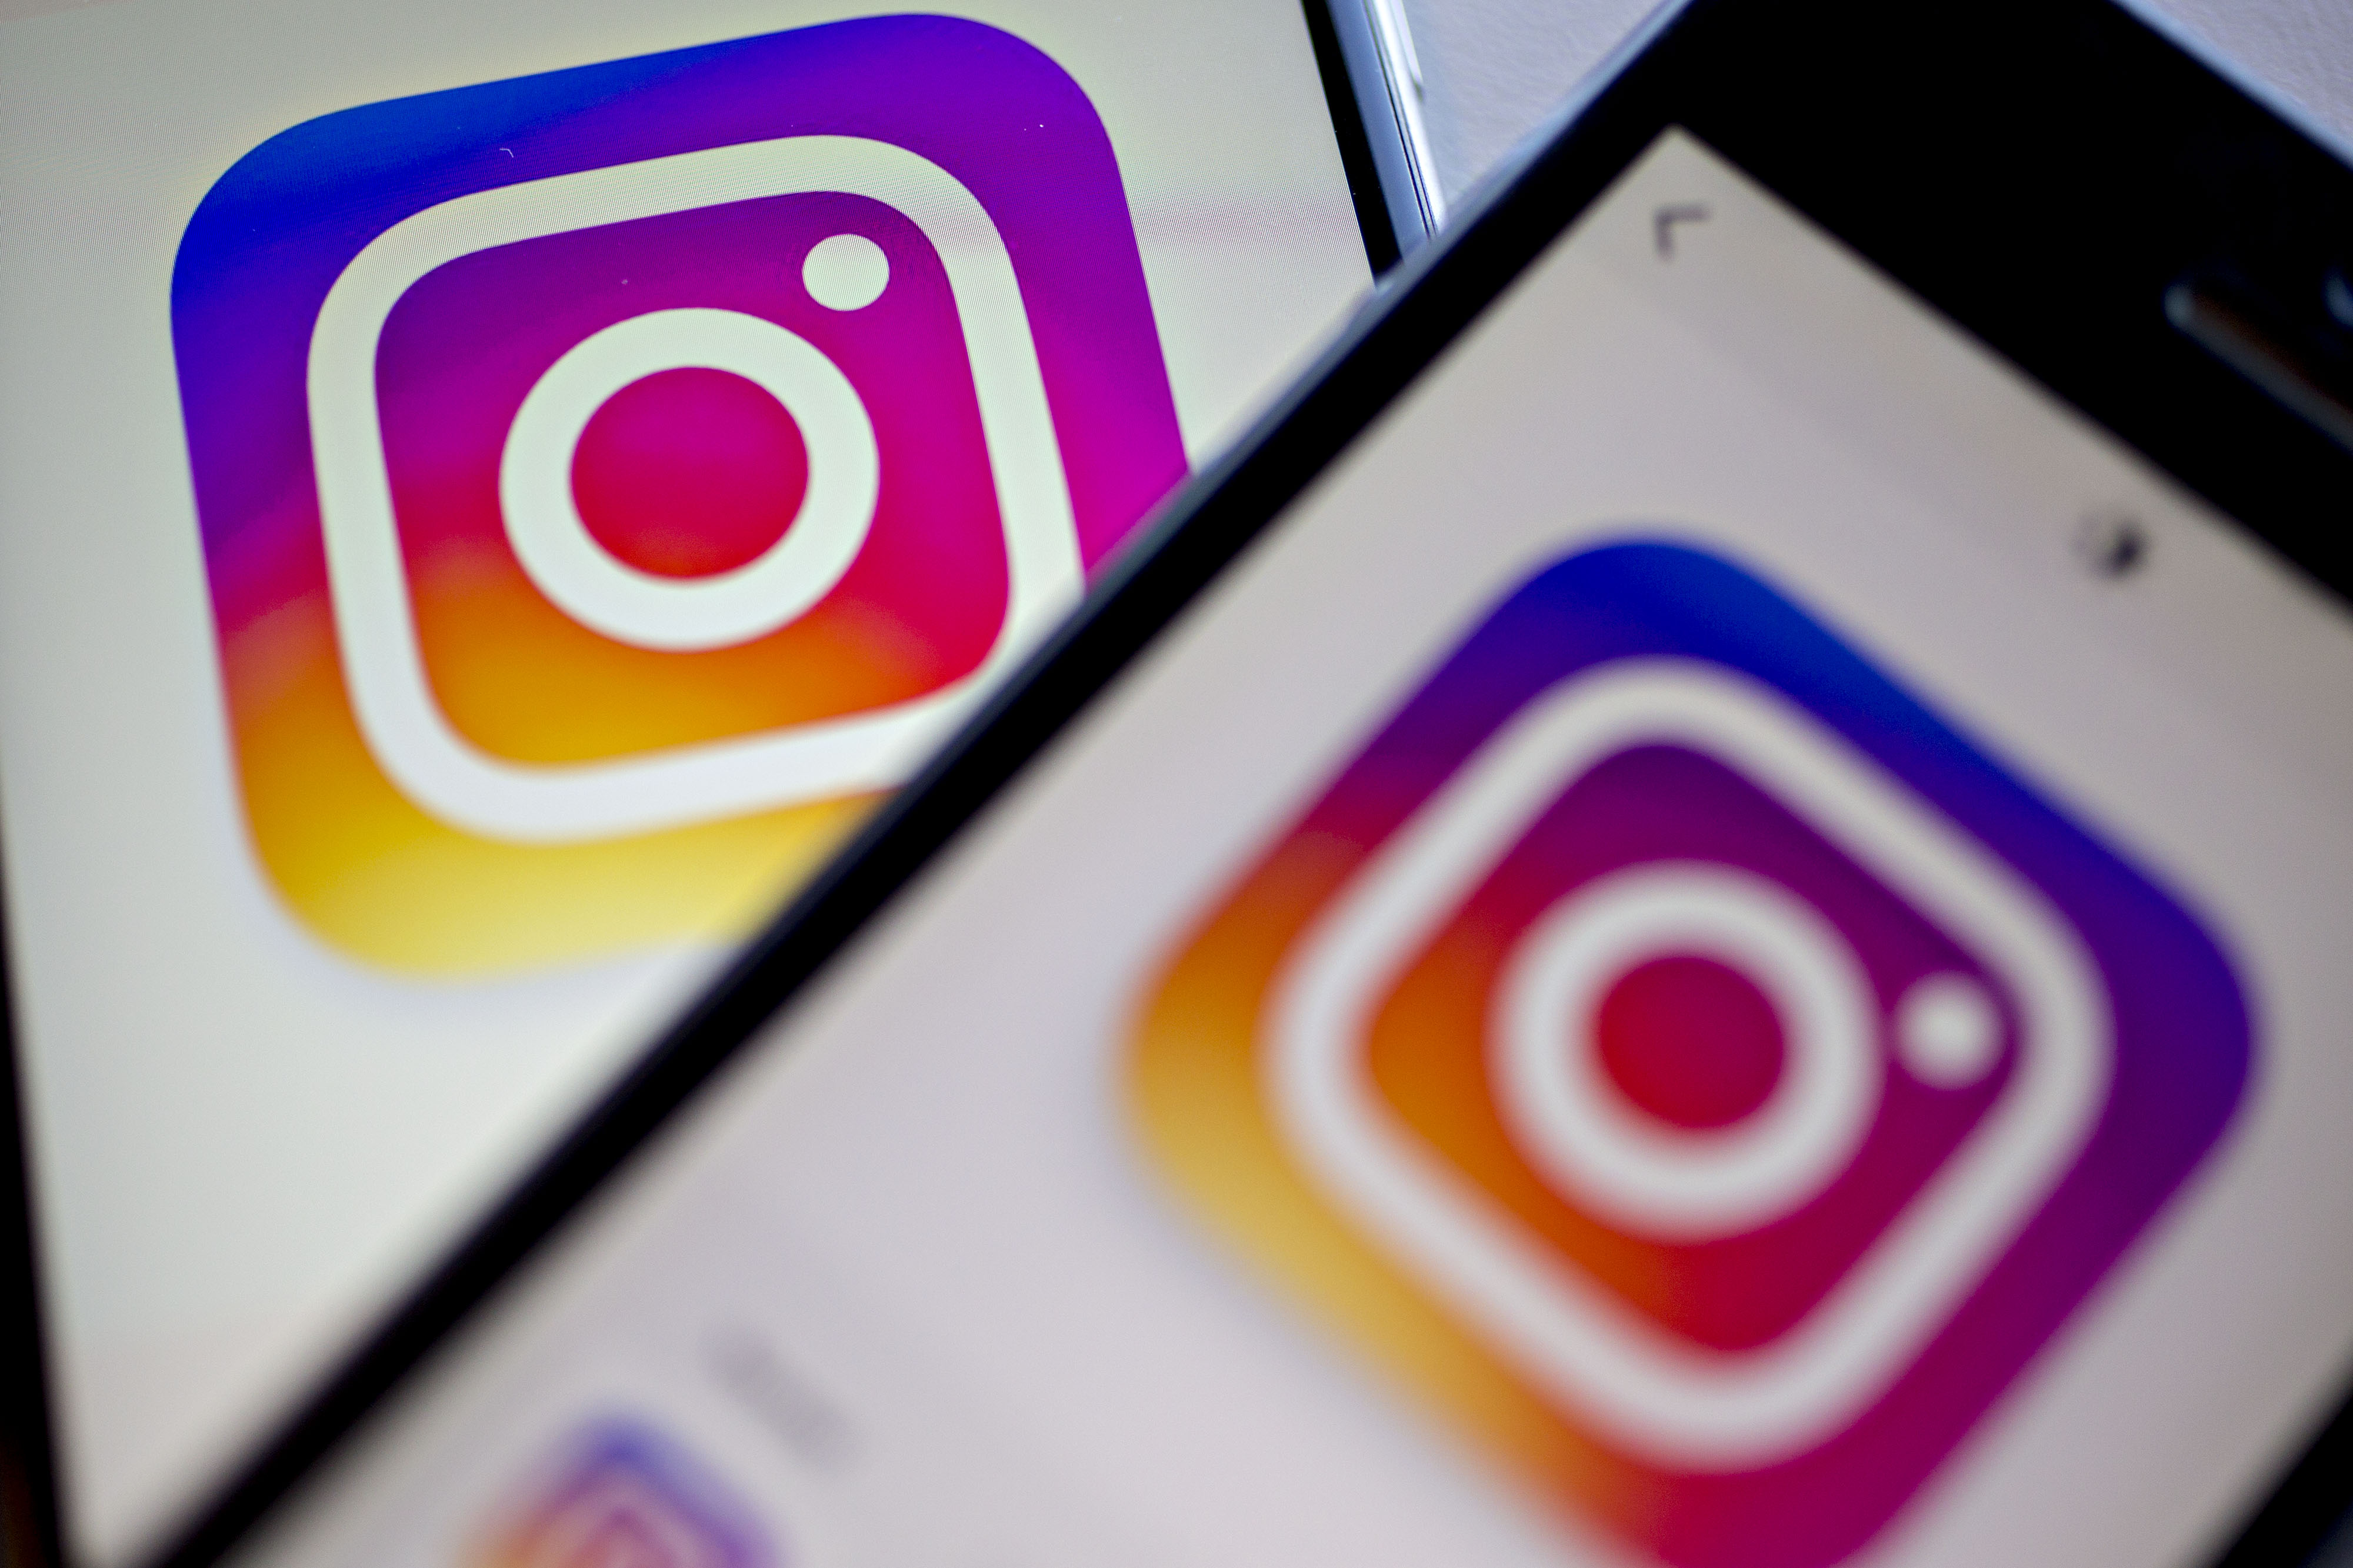 Facebook Inc.'s Instagram logo is displayed on the Instagram application on an Apple Inc. iPhone in this arranged photograph taken in Washington, D.C., U.S., on Friday, June 17, 2016. (Bloomberg—Bloomberg via Getty Images)